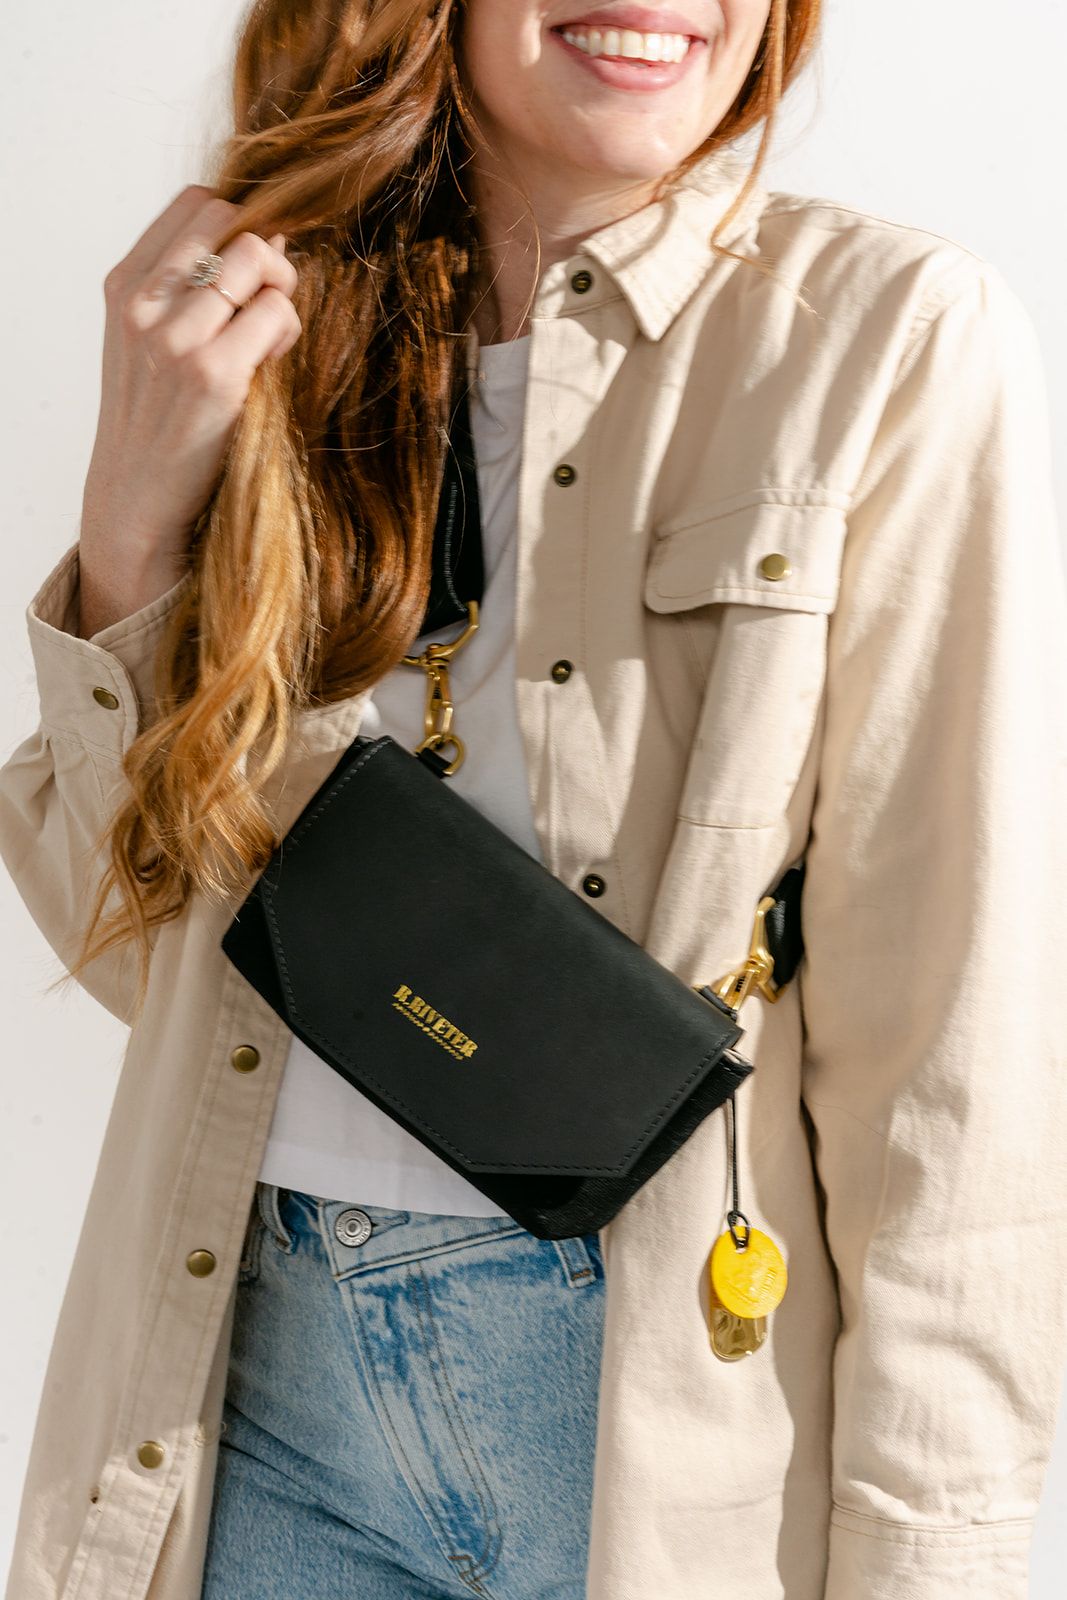 Whittle | Signature Black Canvas + Black Leather with Webbed Crossbody Strap